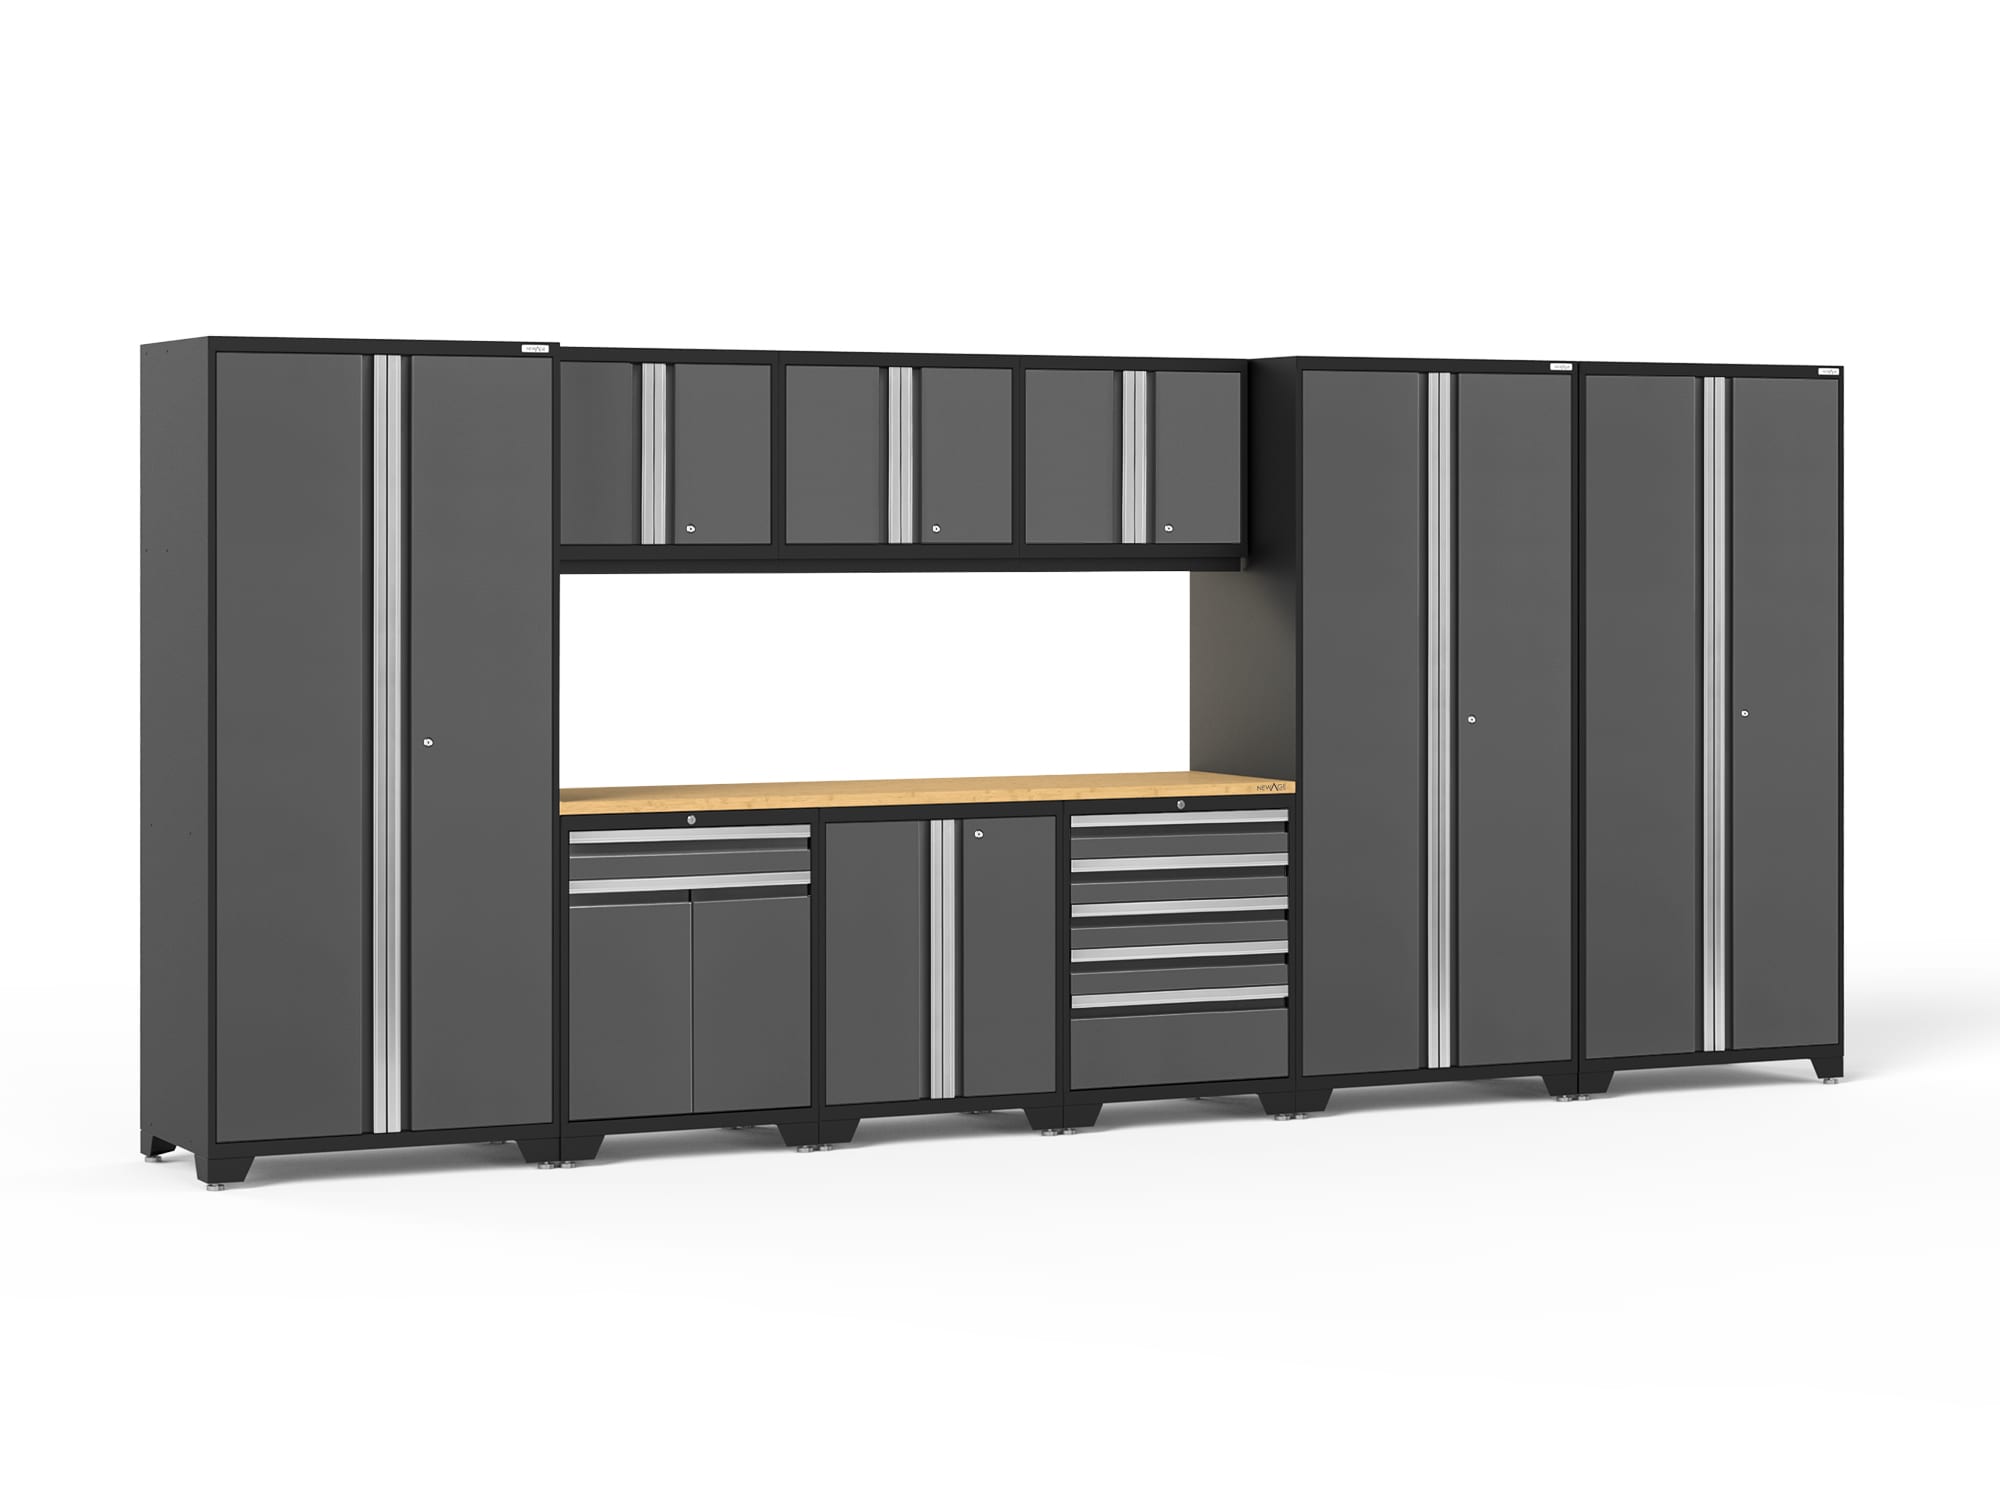 9-Cabinets Steel Garage Storage System in Charcoal Gray (192-in W x 85.25-in H) | - NewAge Products 51986